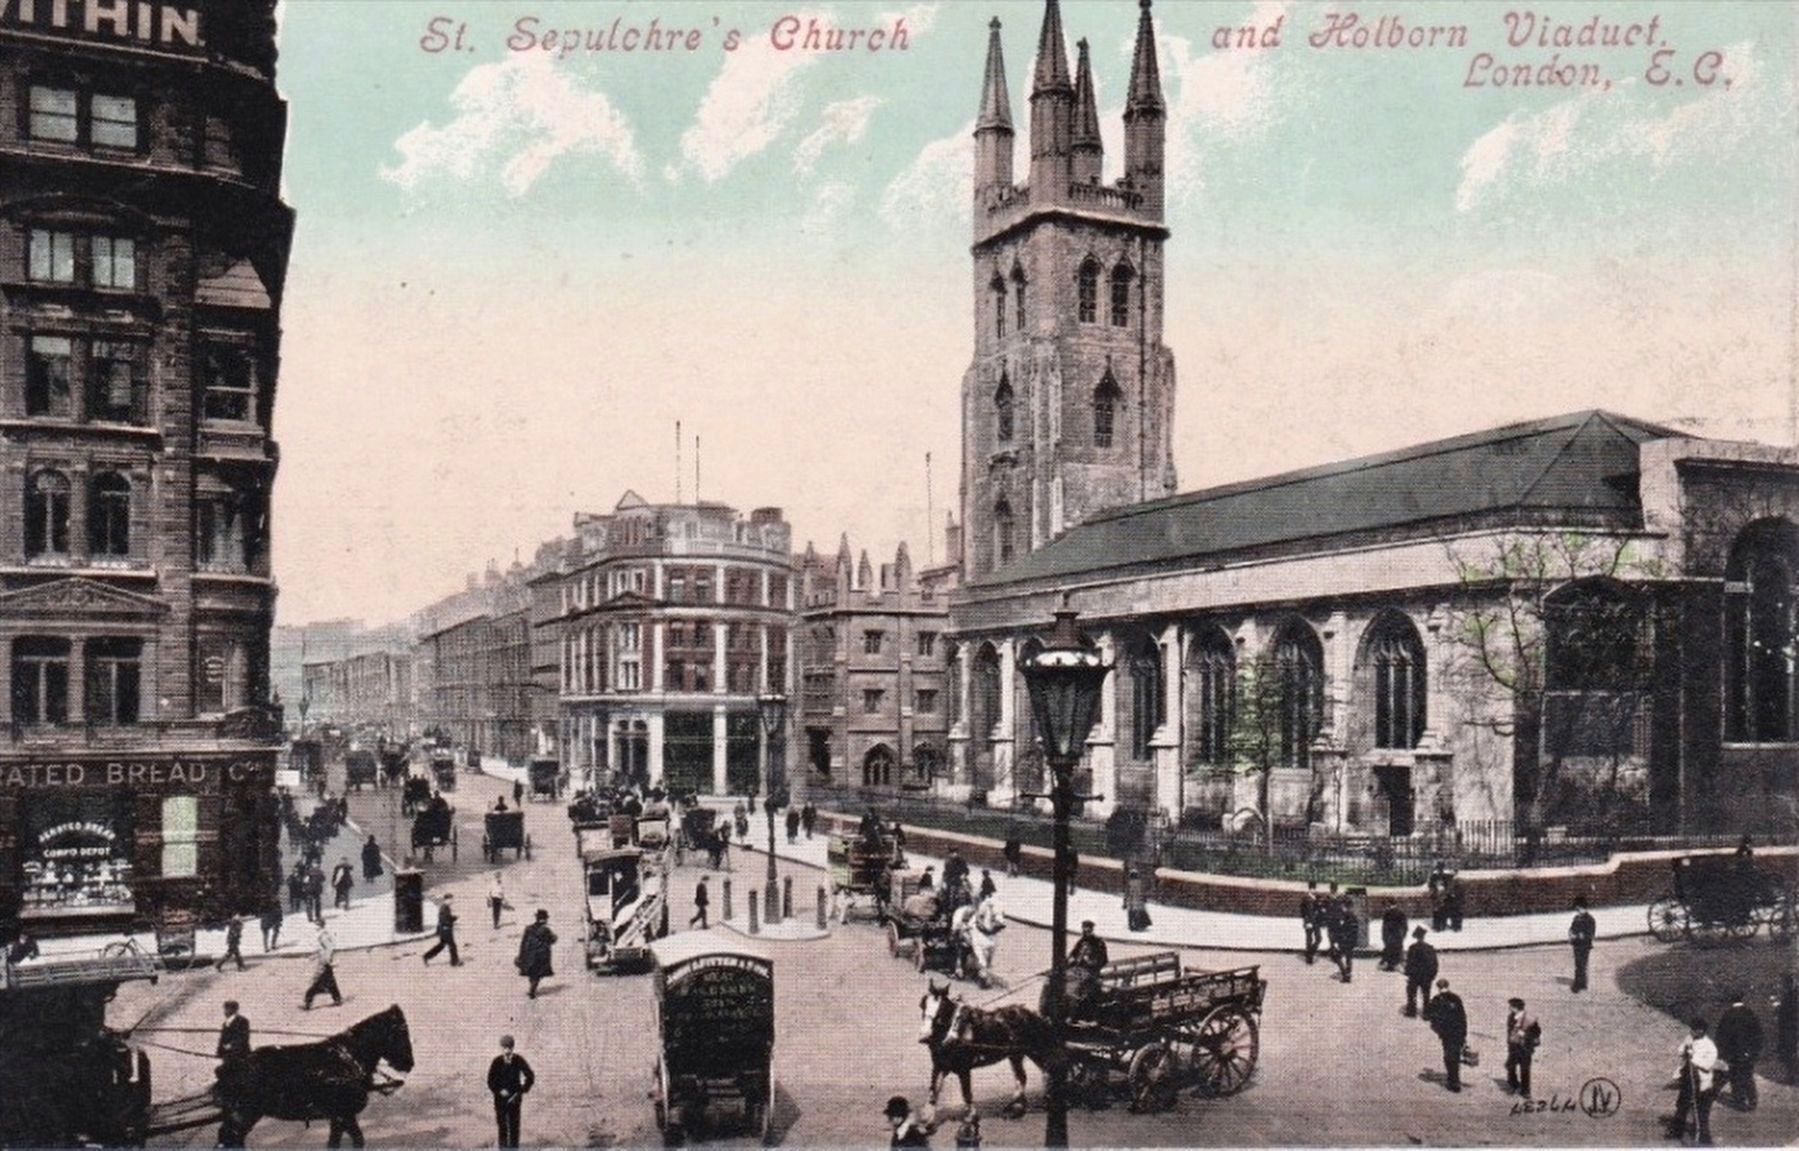 <i>St. Sepulchre's Church and Holborn Viaduct, London, E.C.</i> image. Click for full size.